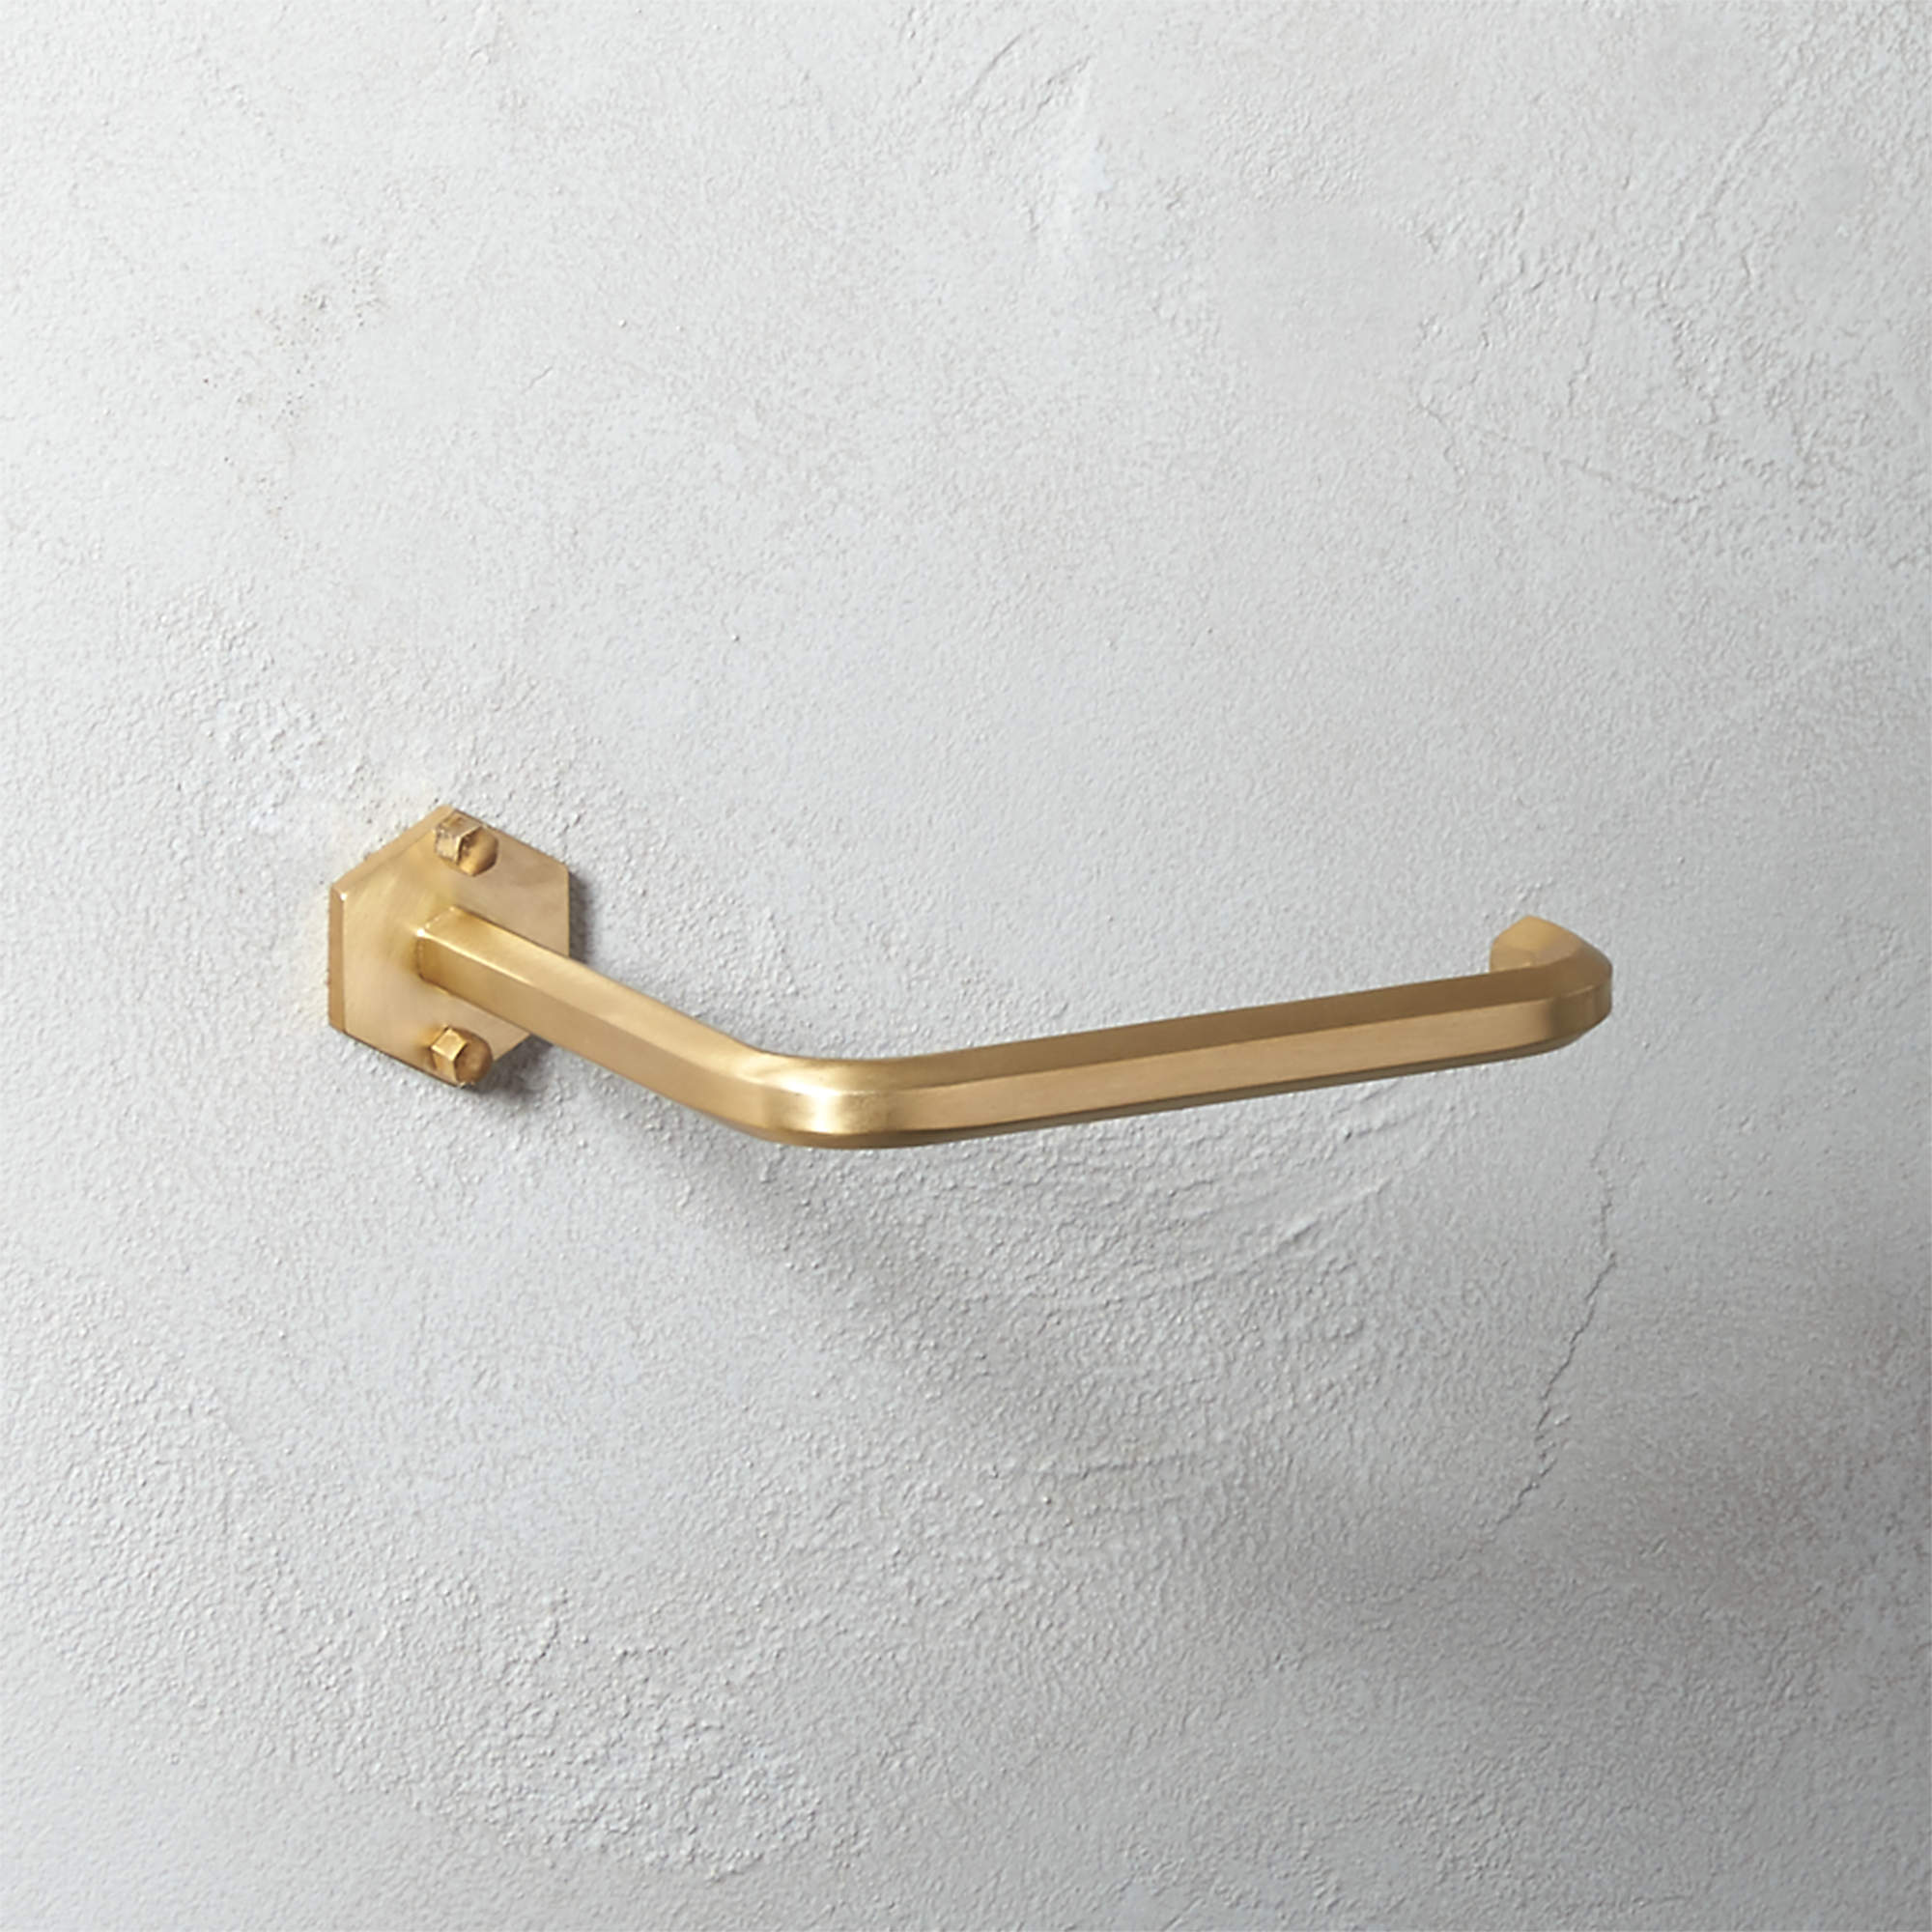 Shop HEX BRASS WALL MOUNTED TOILET PAPER HOLDER from CB2 on Openhaus